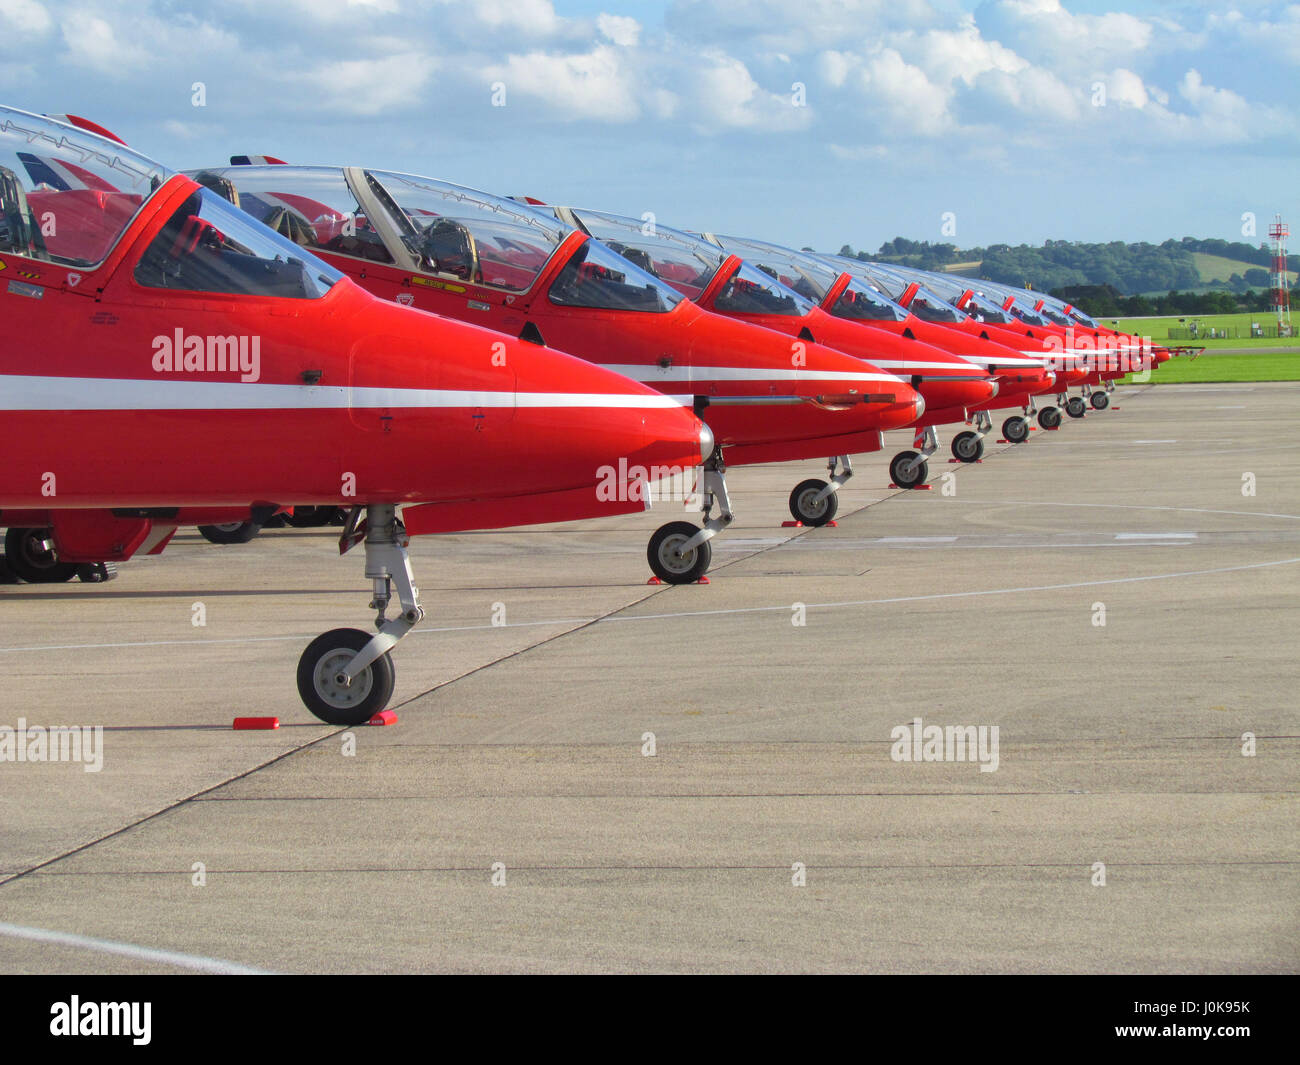 The Red Arrows parked in a line at RNAS Yeovilton, June 2012 with Somerset countryside in the background. Stock Photo